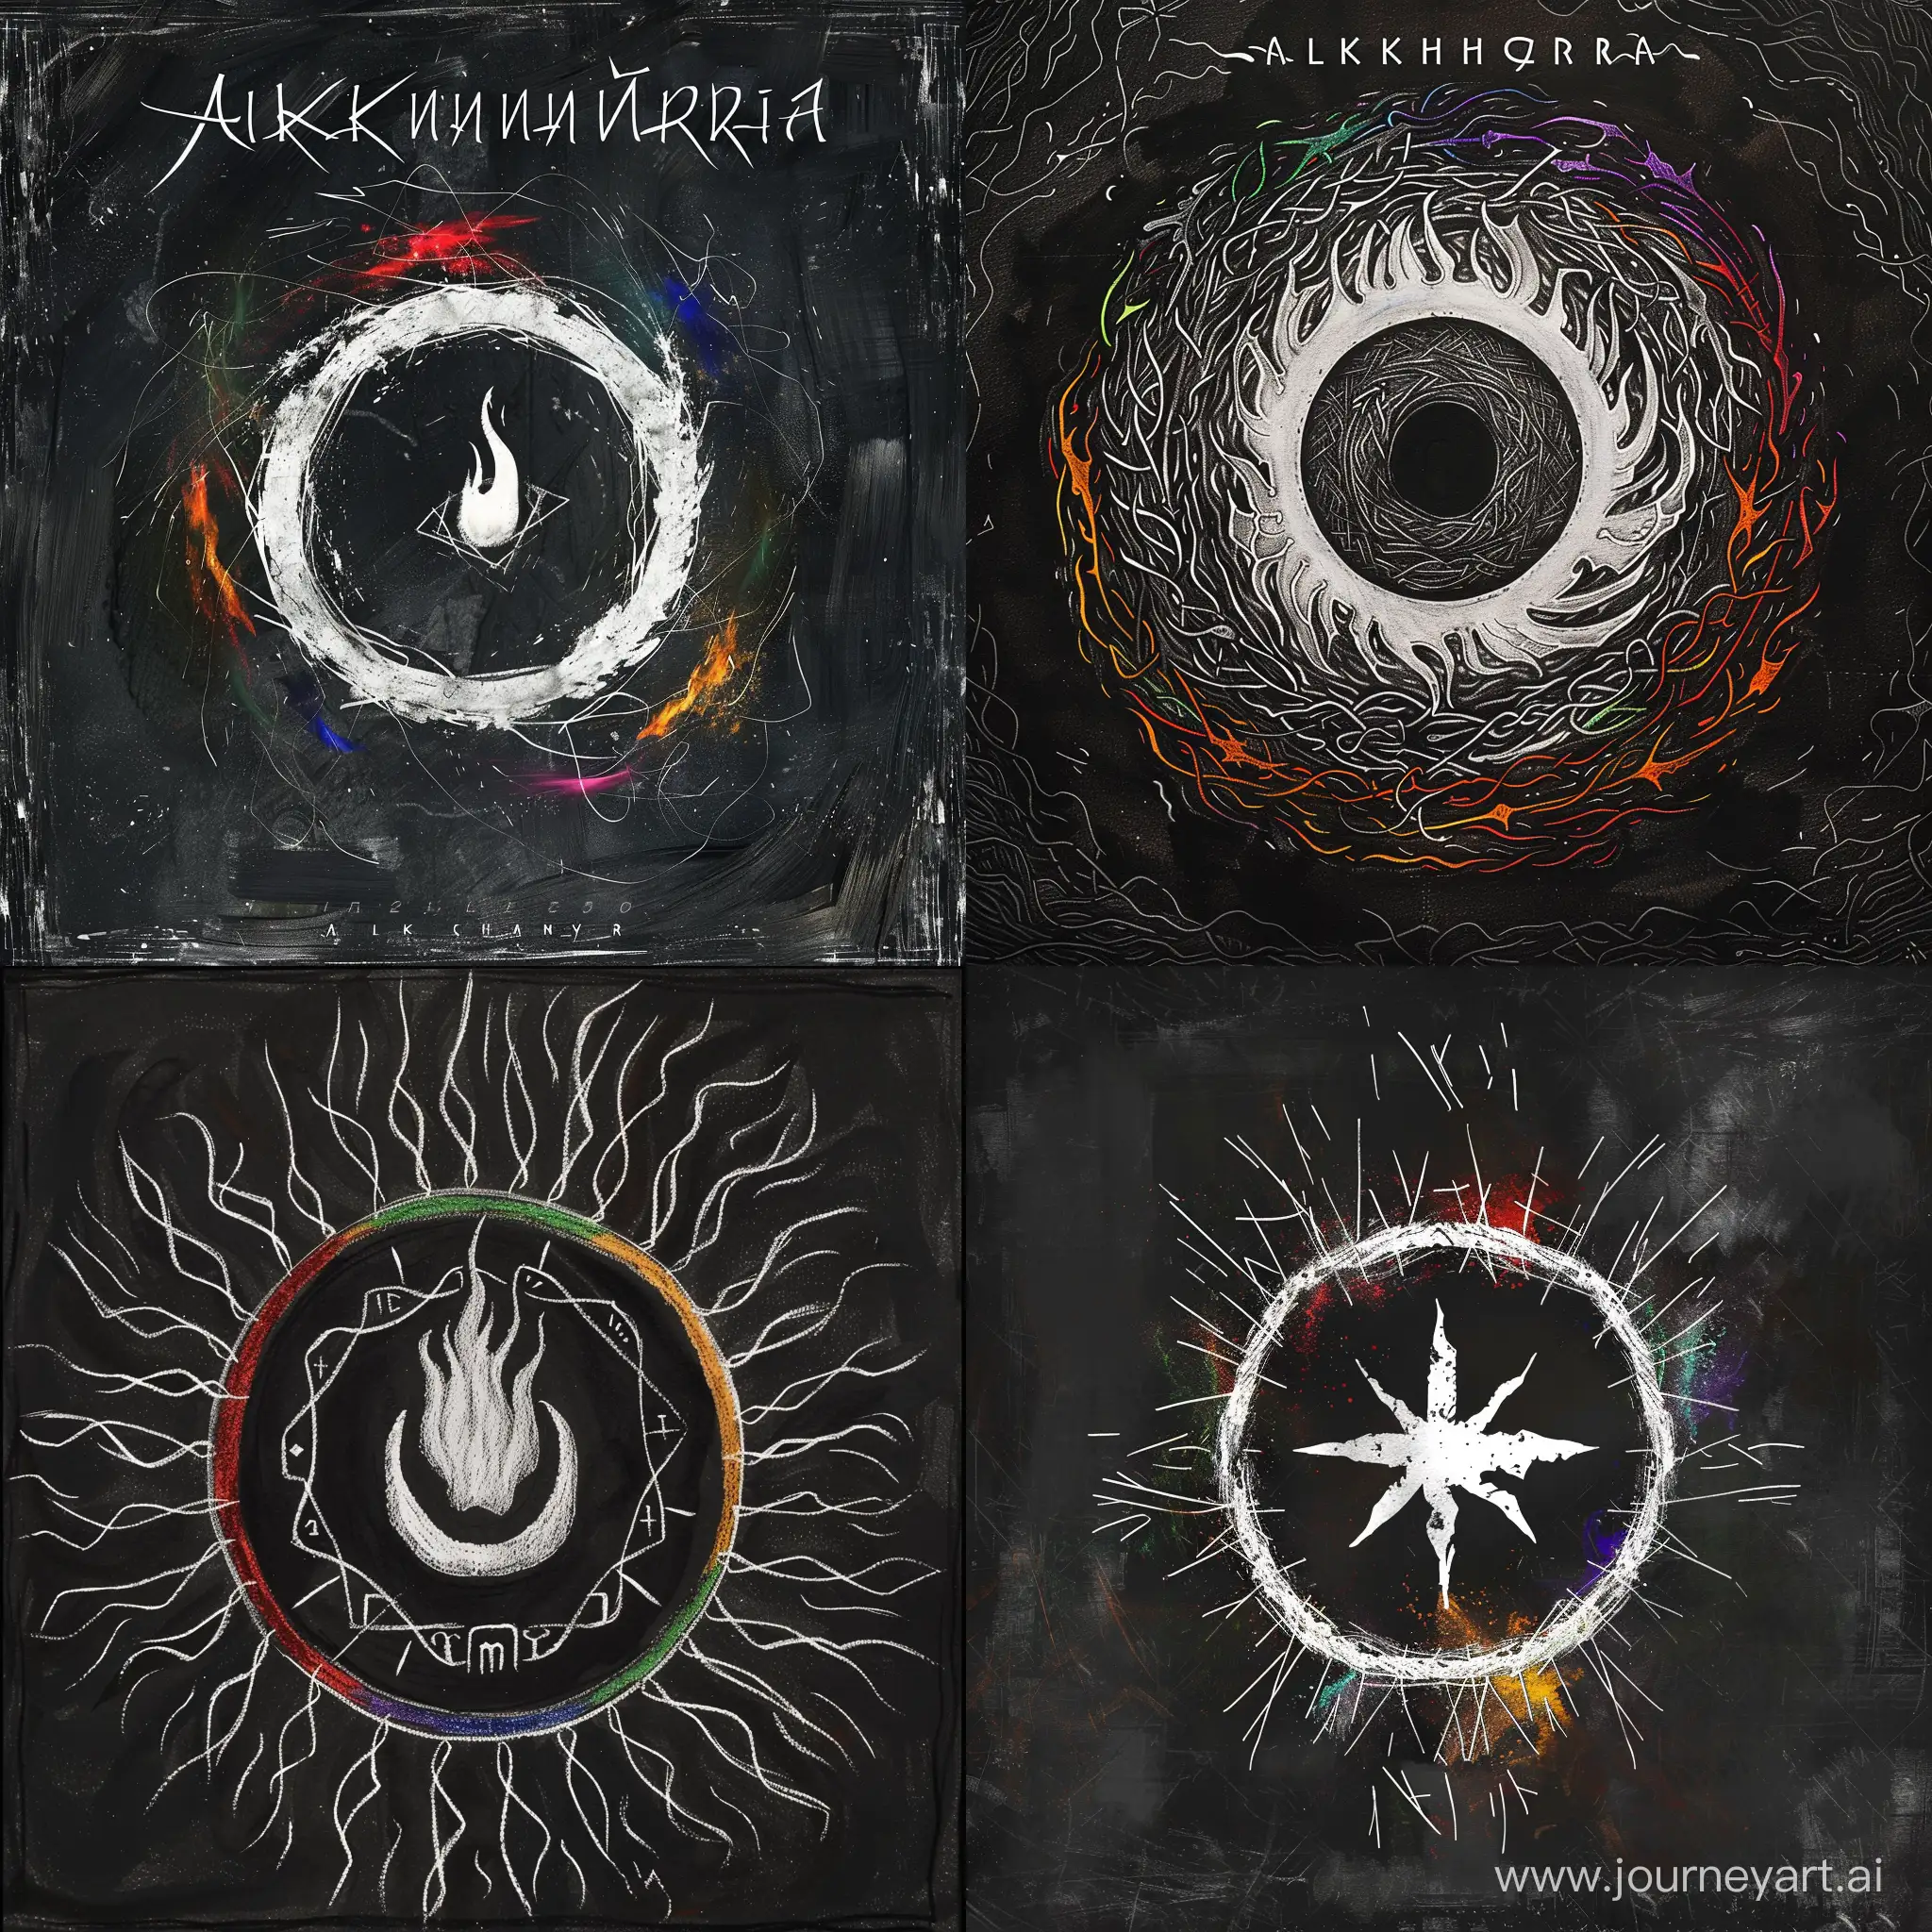 Monochromatic-Sketch-of-Alkhandra-Rune-with-Multicolored-Burning-Circle